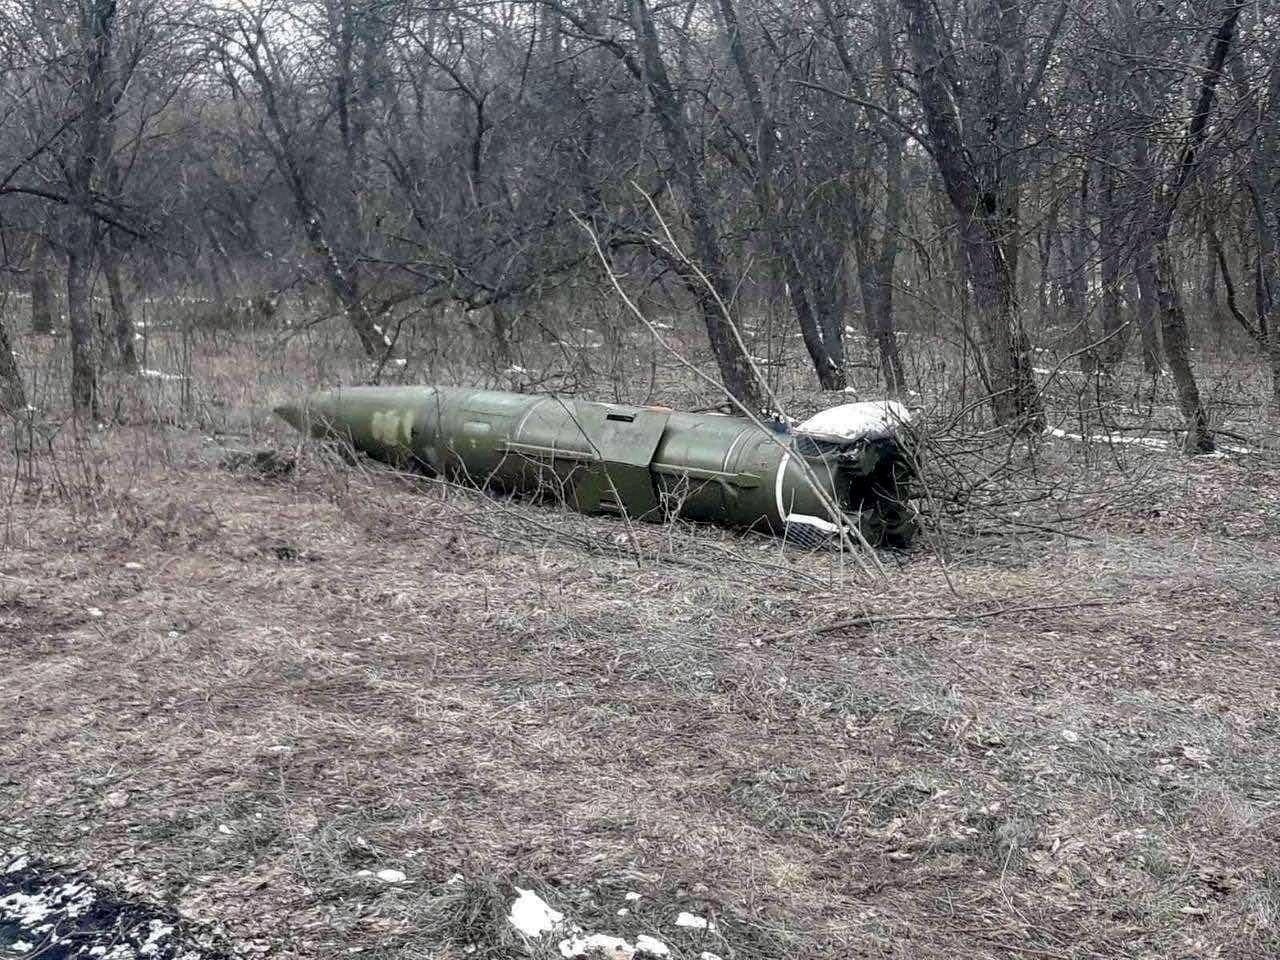 An unexploded missile is seen amid the Ukraine-Russia conflict in Kramatorsk, eastern Ukraine, in this handout picture released on March 9, 2022. (Press service of the National Guard of Ukraine/Handout via Reuters)